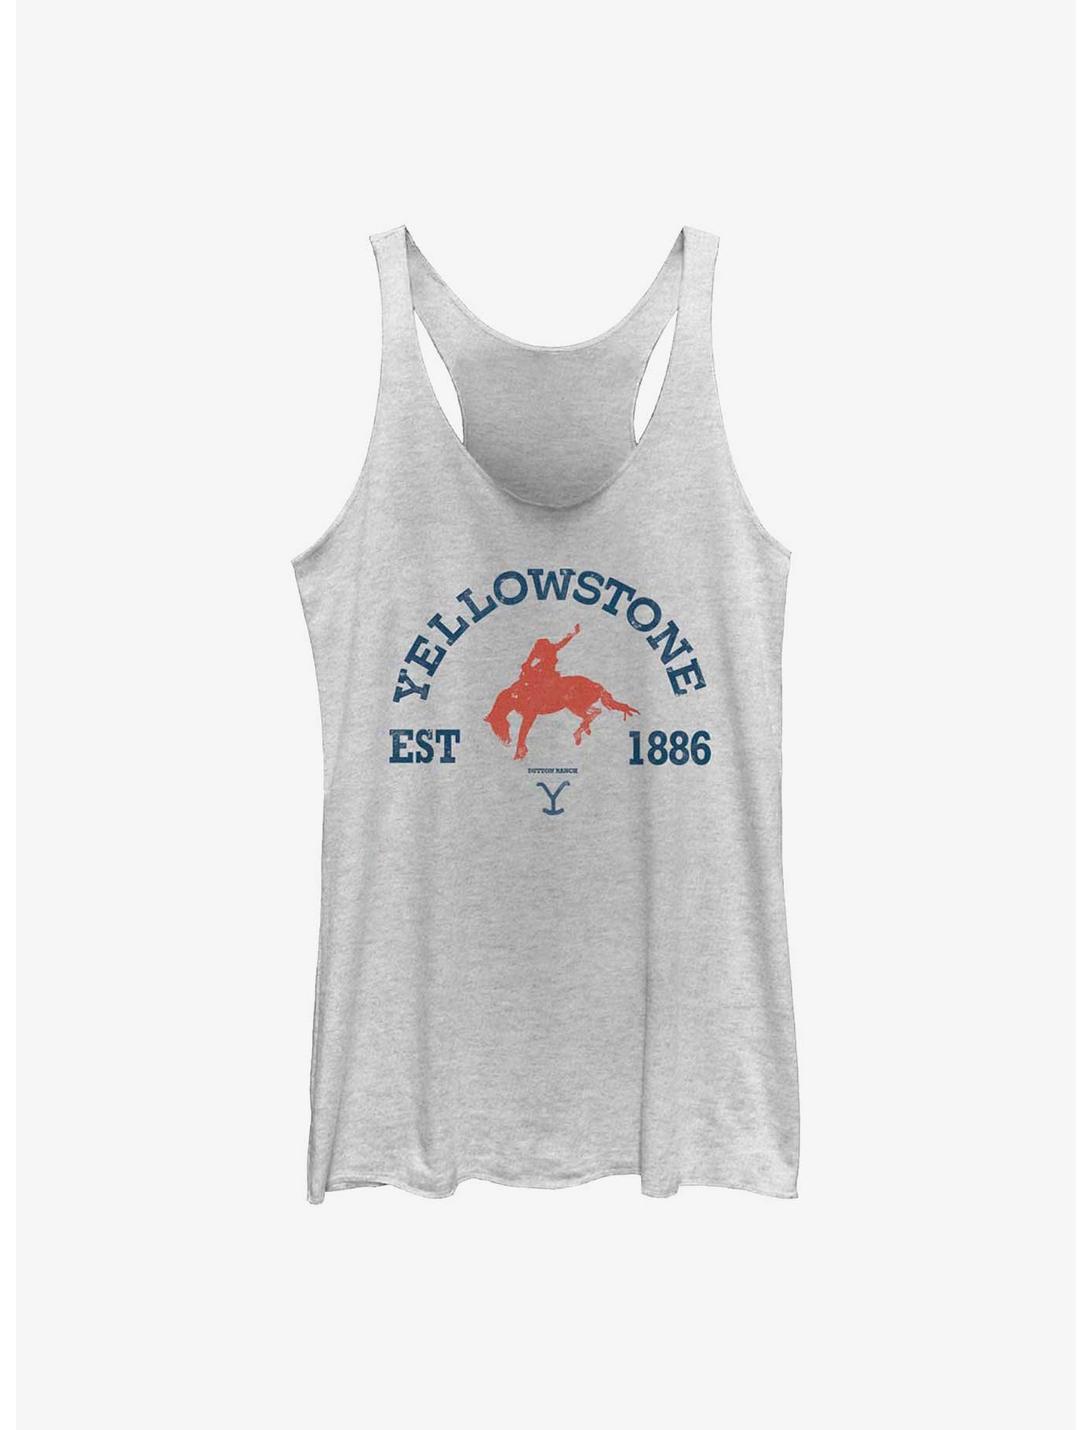 Yellowstone Stay Wild Womens Tank Top, WHITE HTR, hi-res